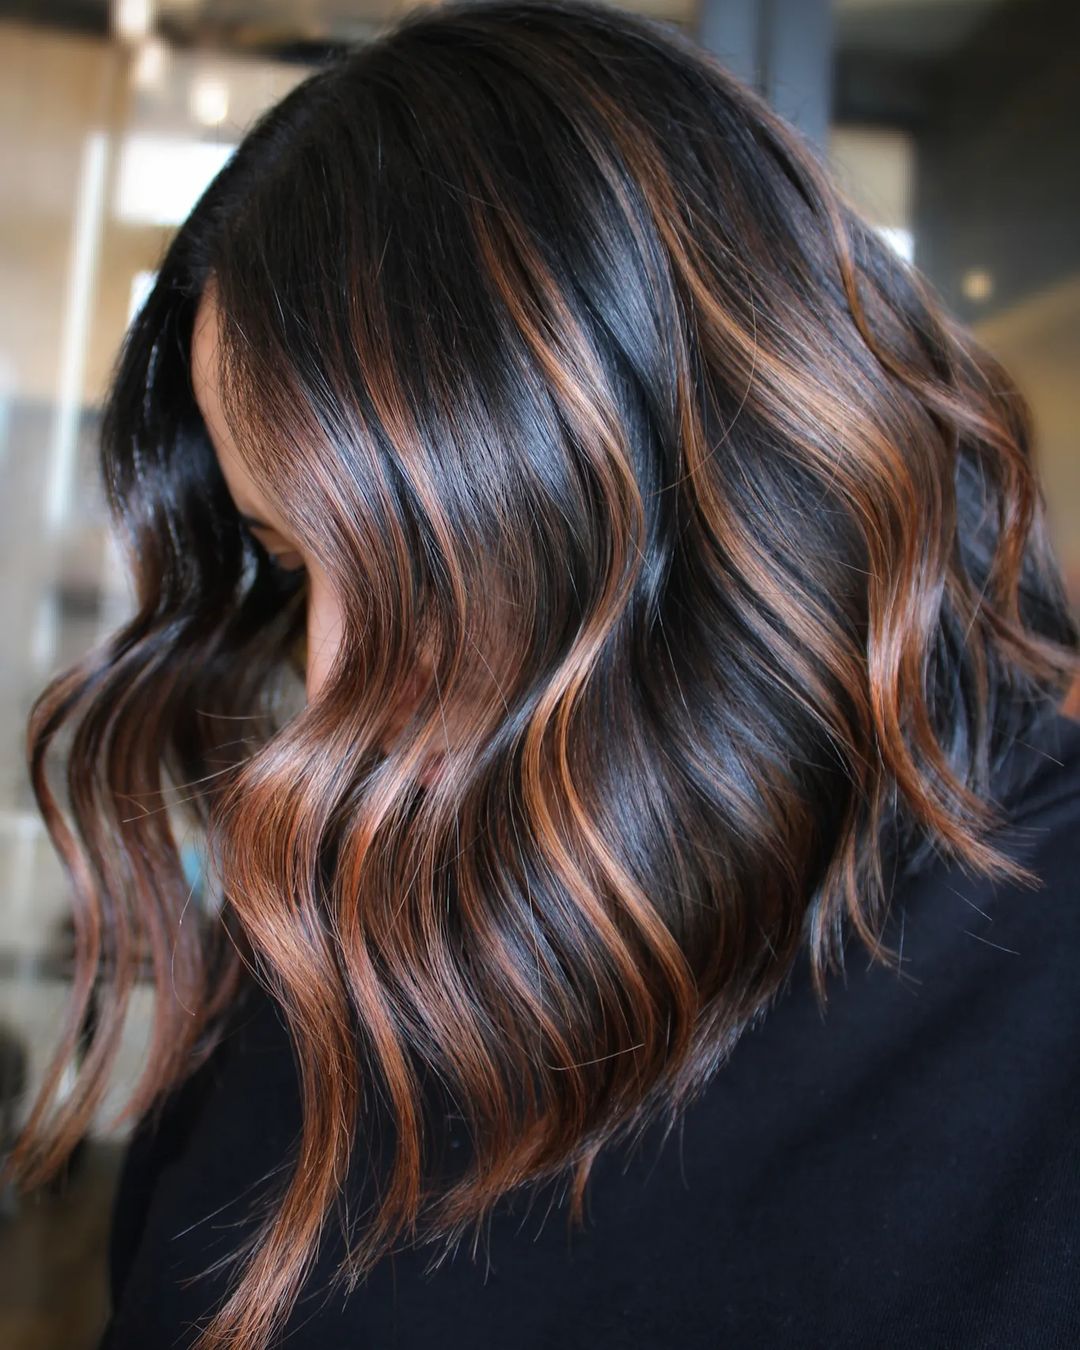 20 Delicious Caramel Balayage Ideas for Your Hair Makeover - Hairstylery